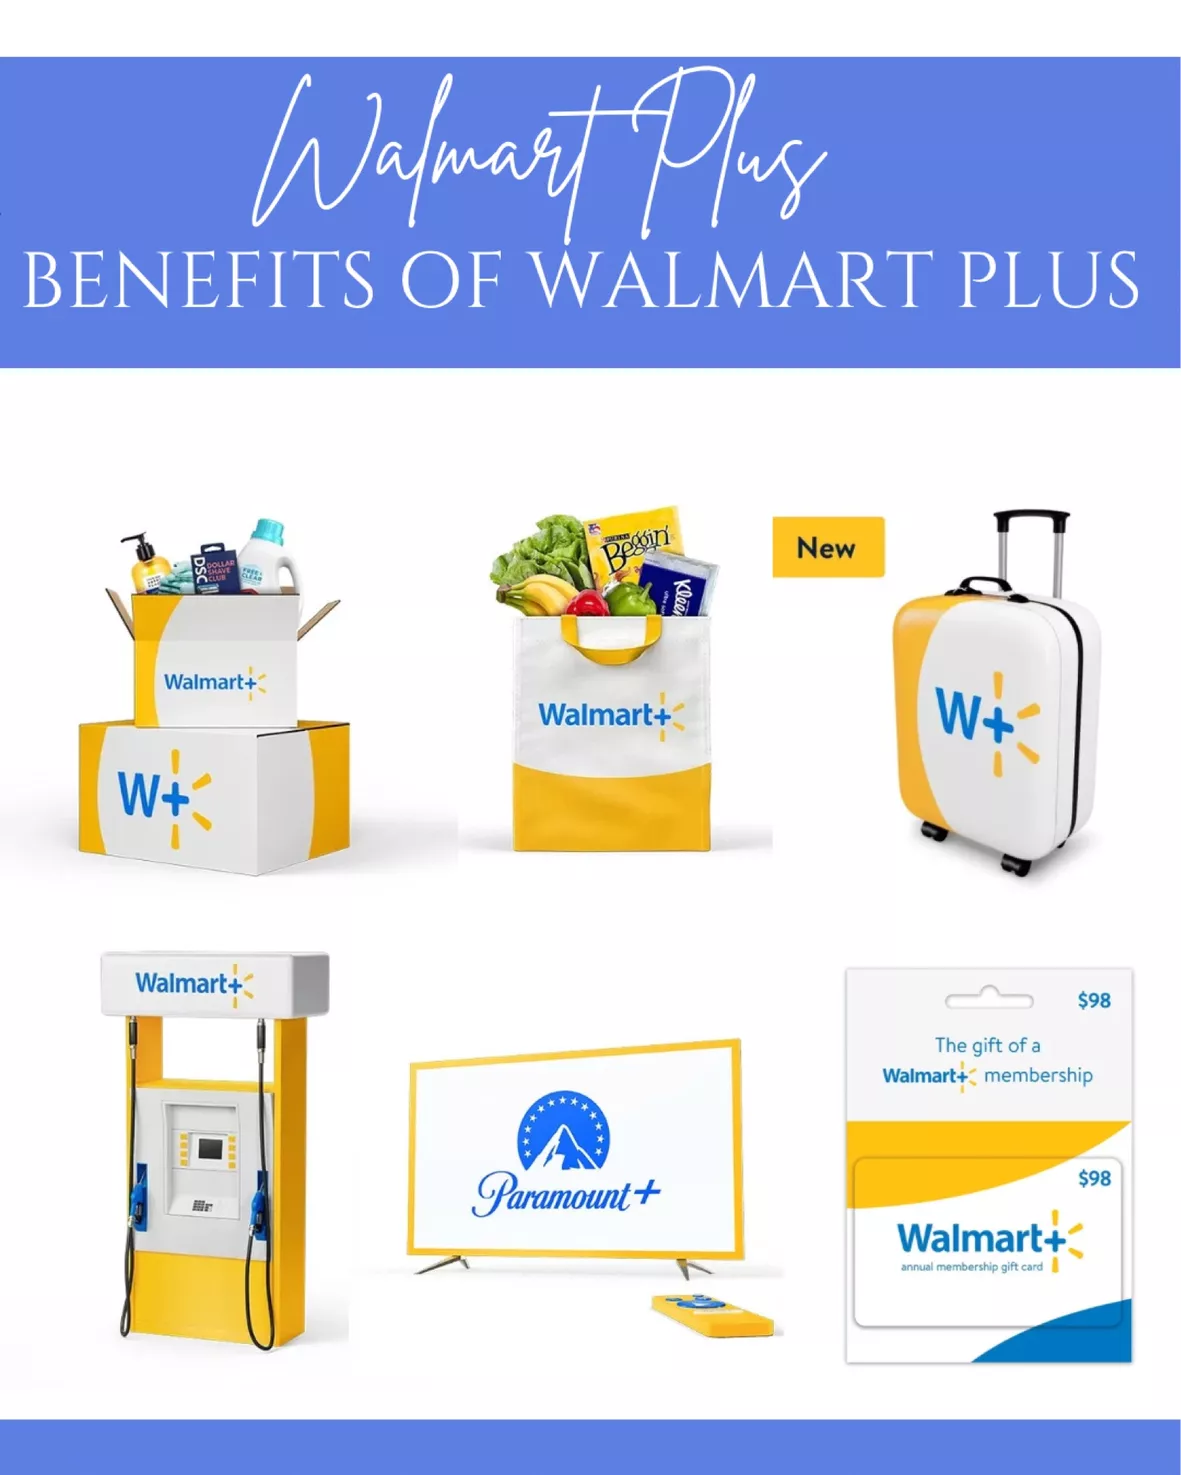 Walmart to offer free next-day shipping, beginning this week – The